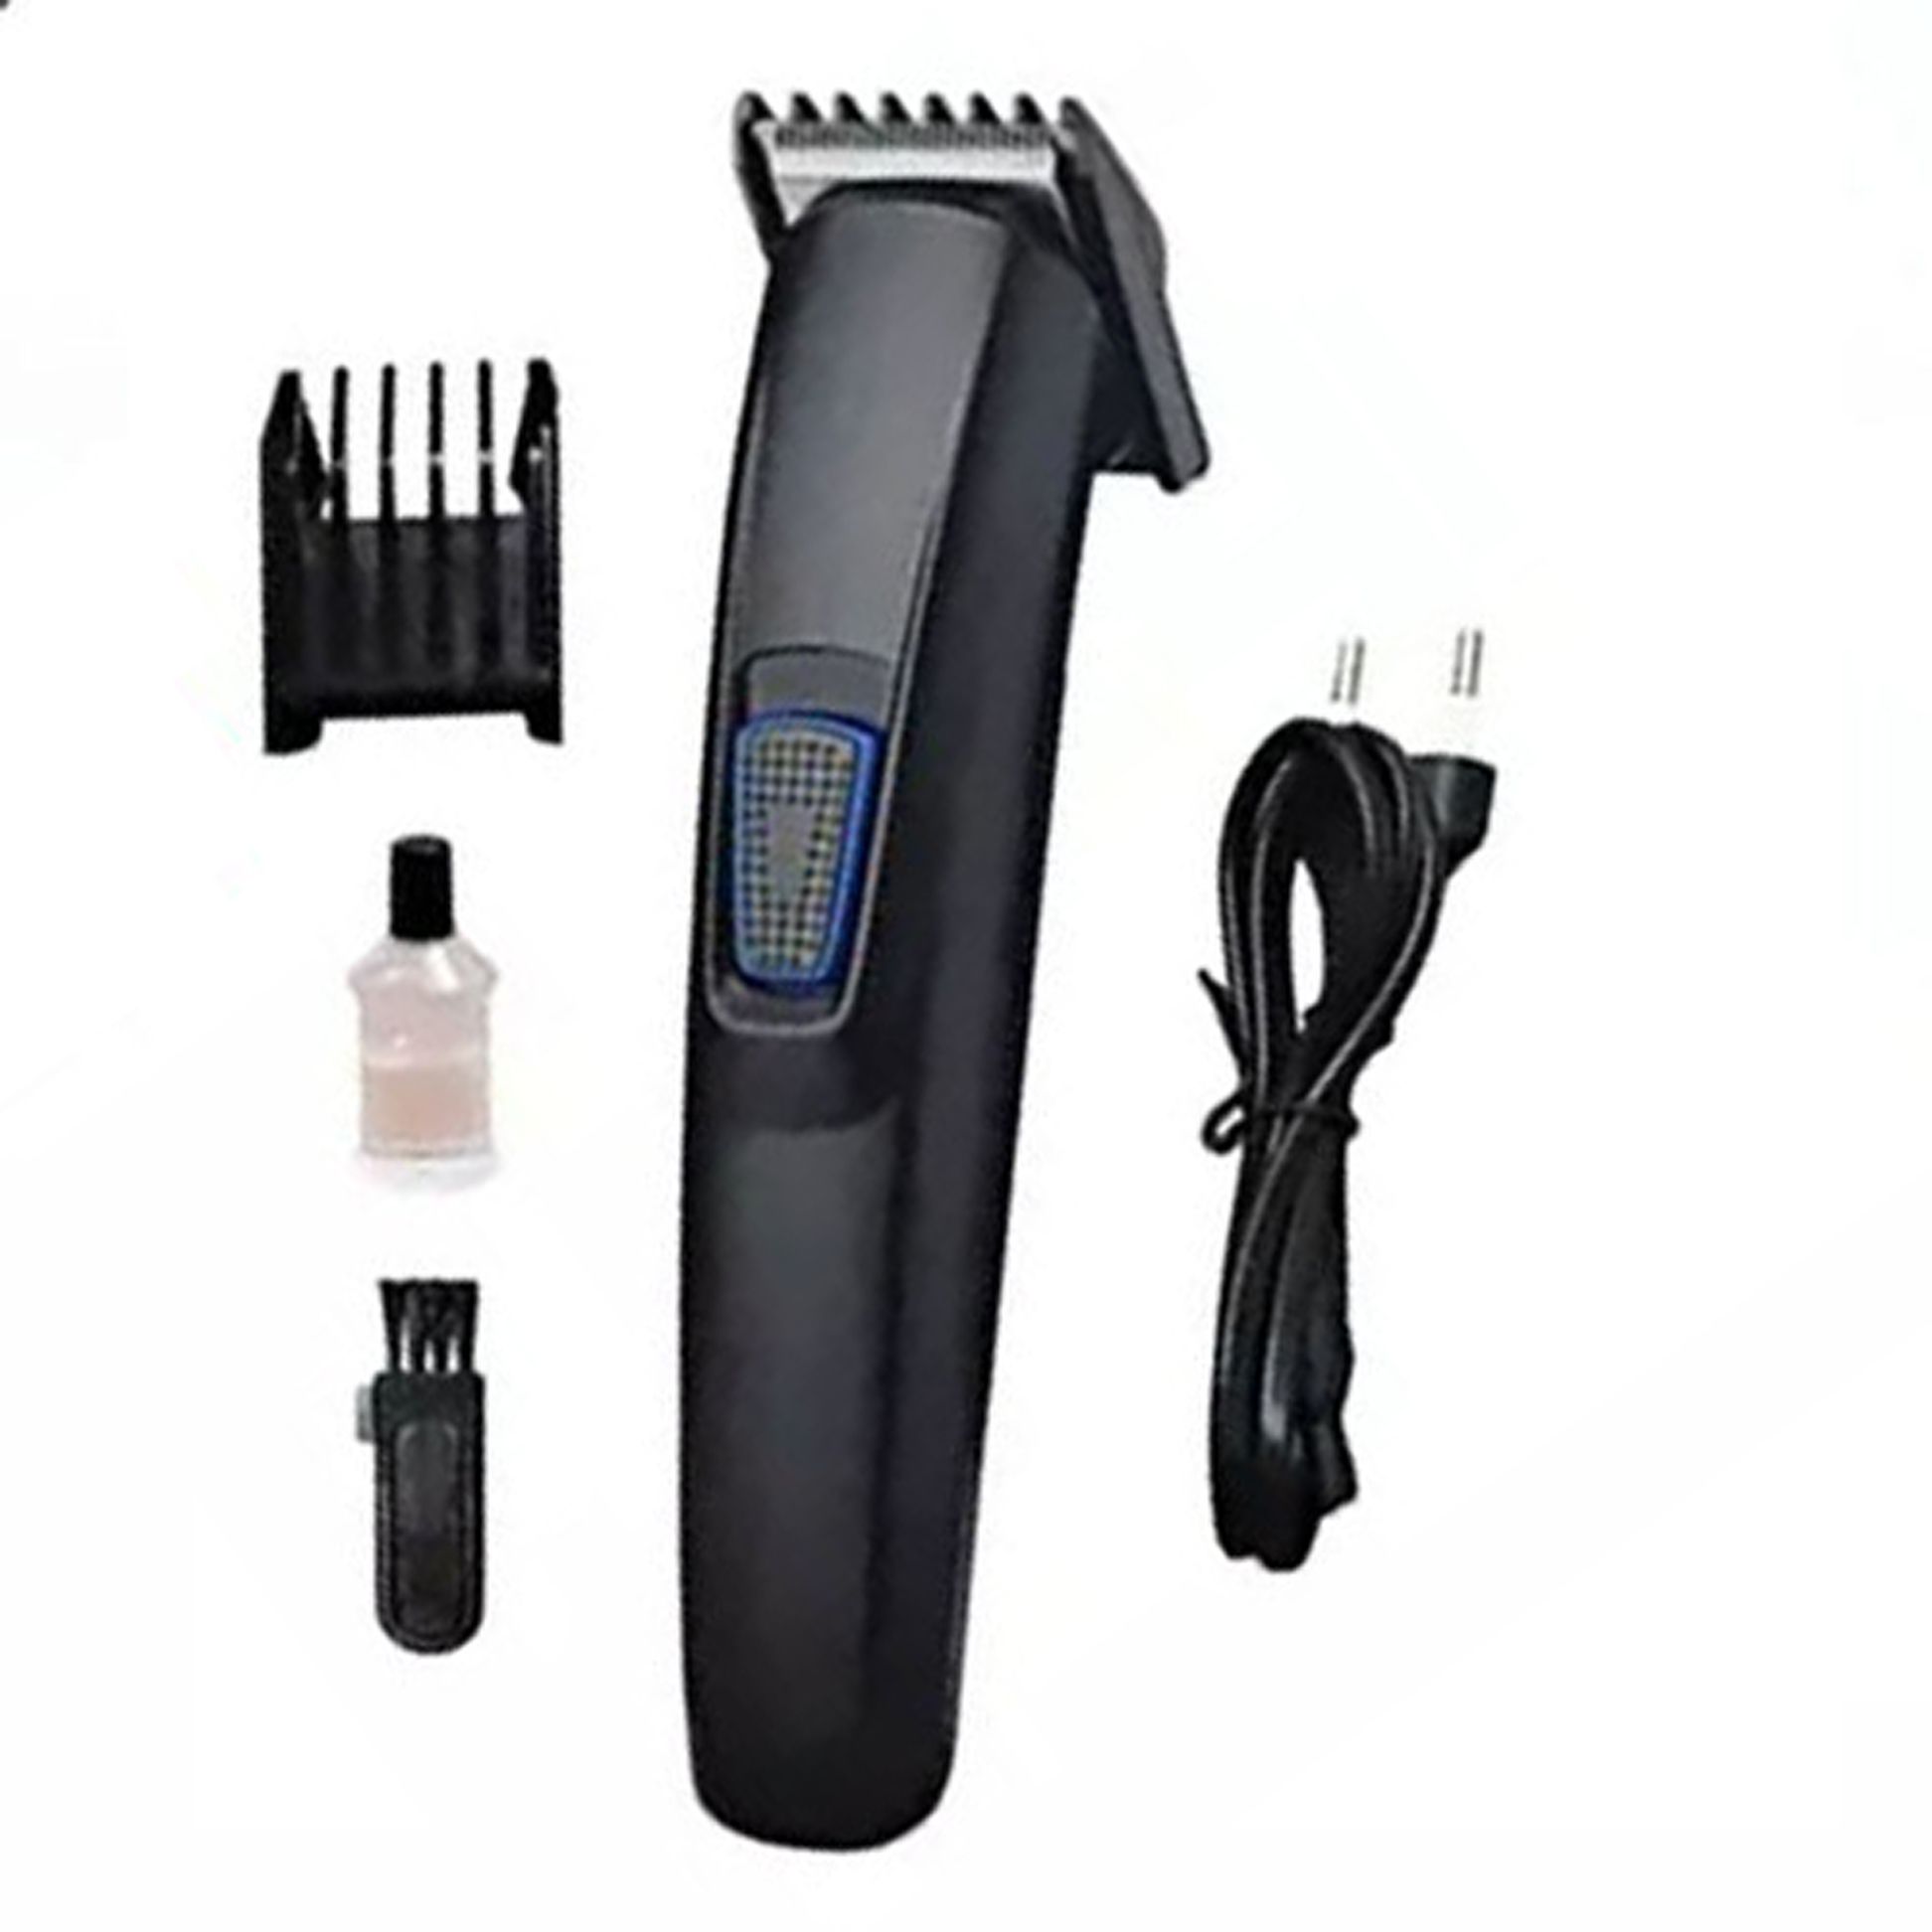 Rechargeable Cordless Beard Trimmer AT 522 (Black )